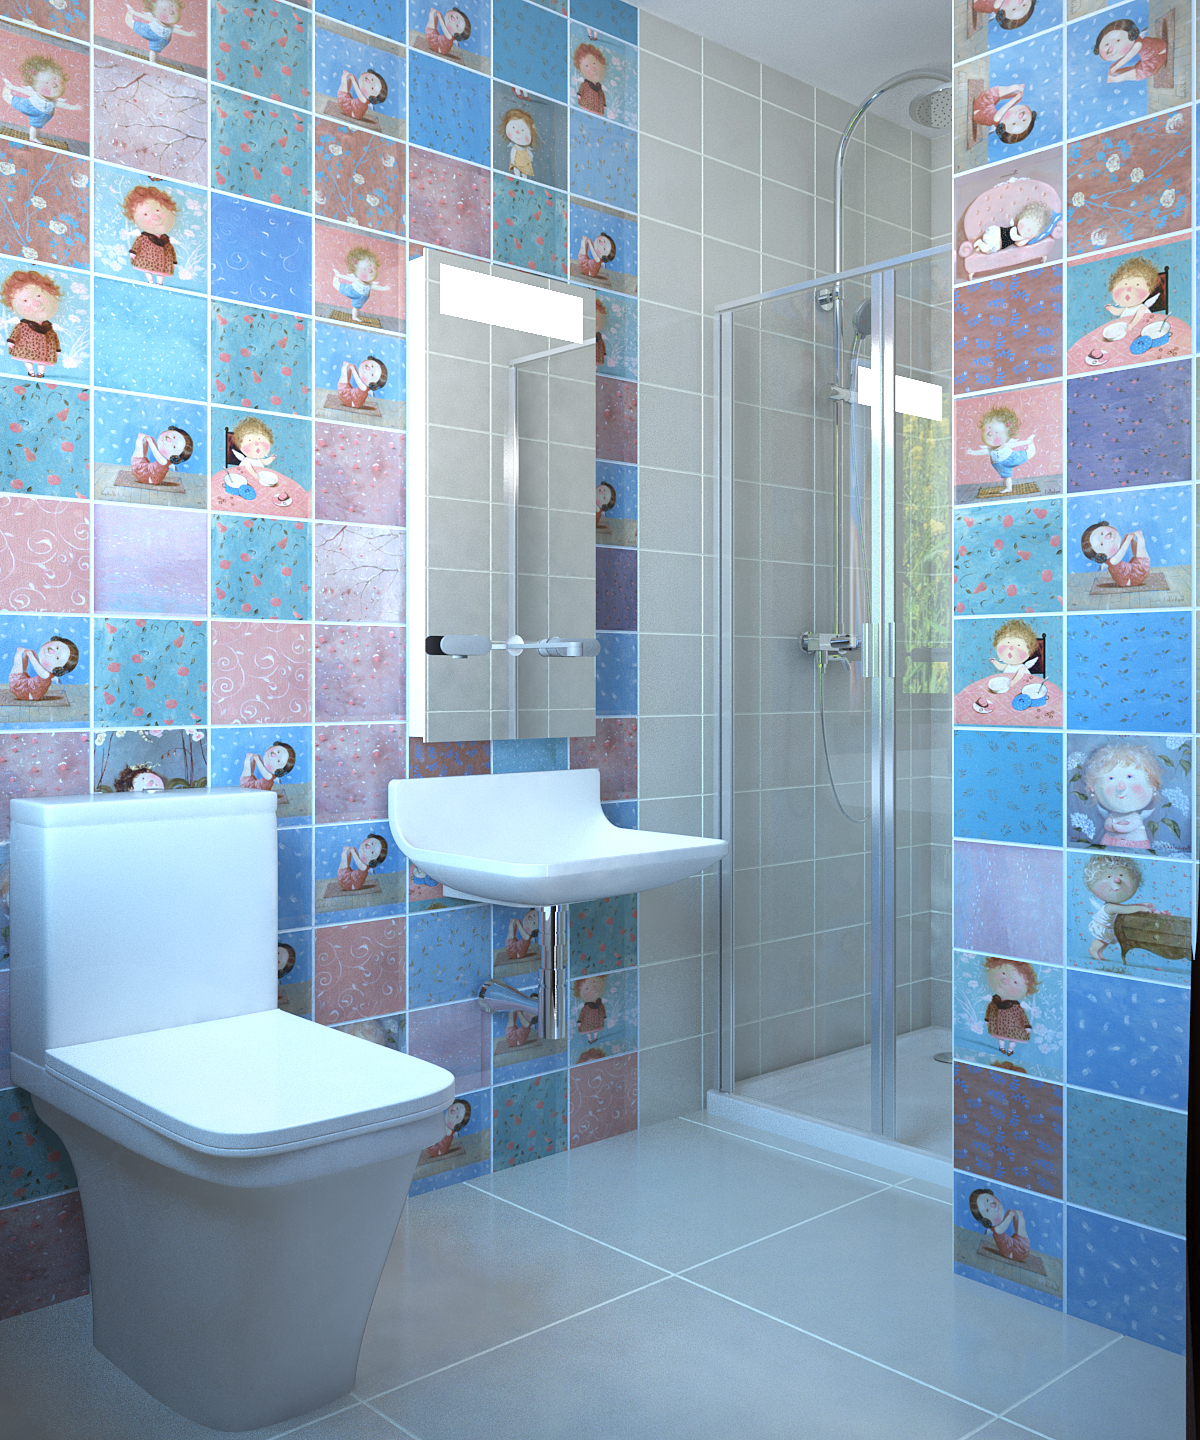 Design and visualization of two bathrooms in 3d max vray 2.0 image